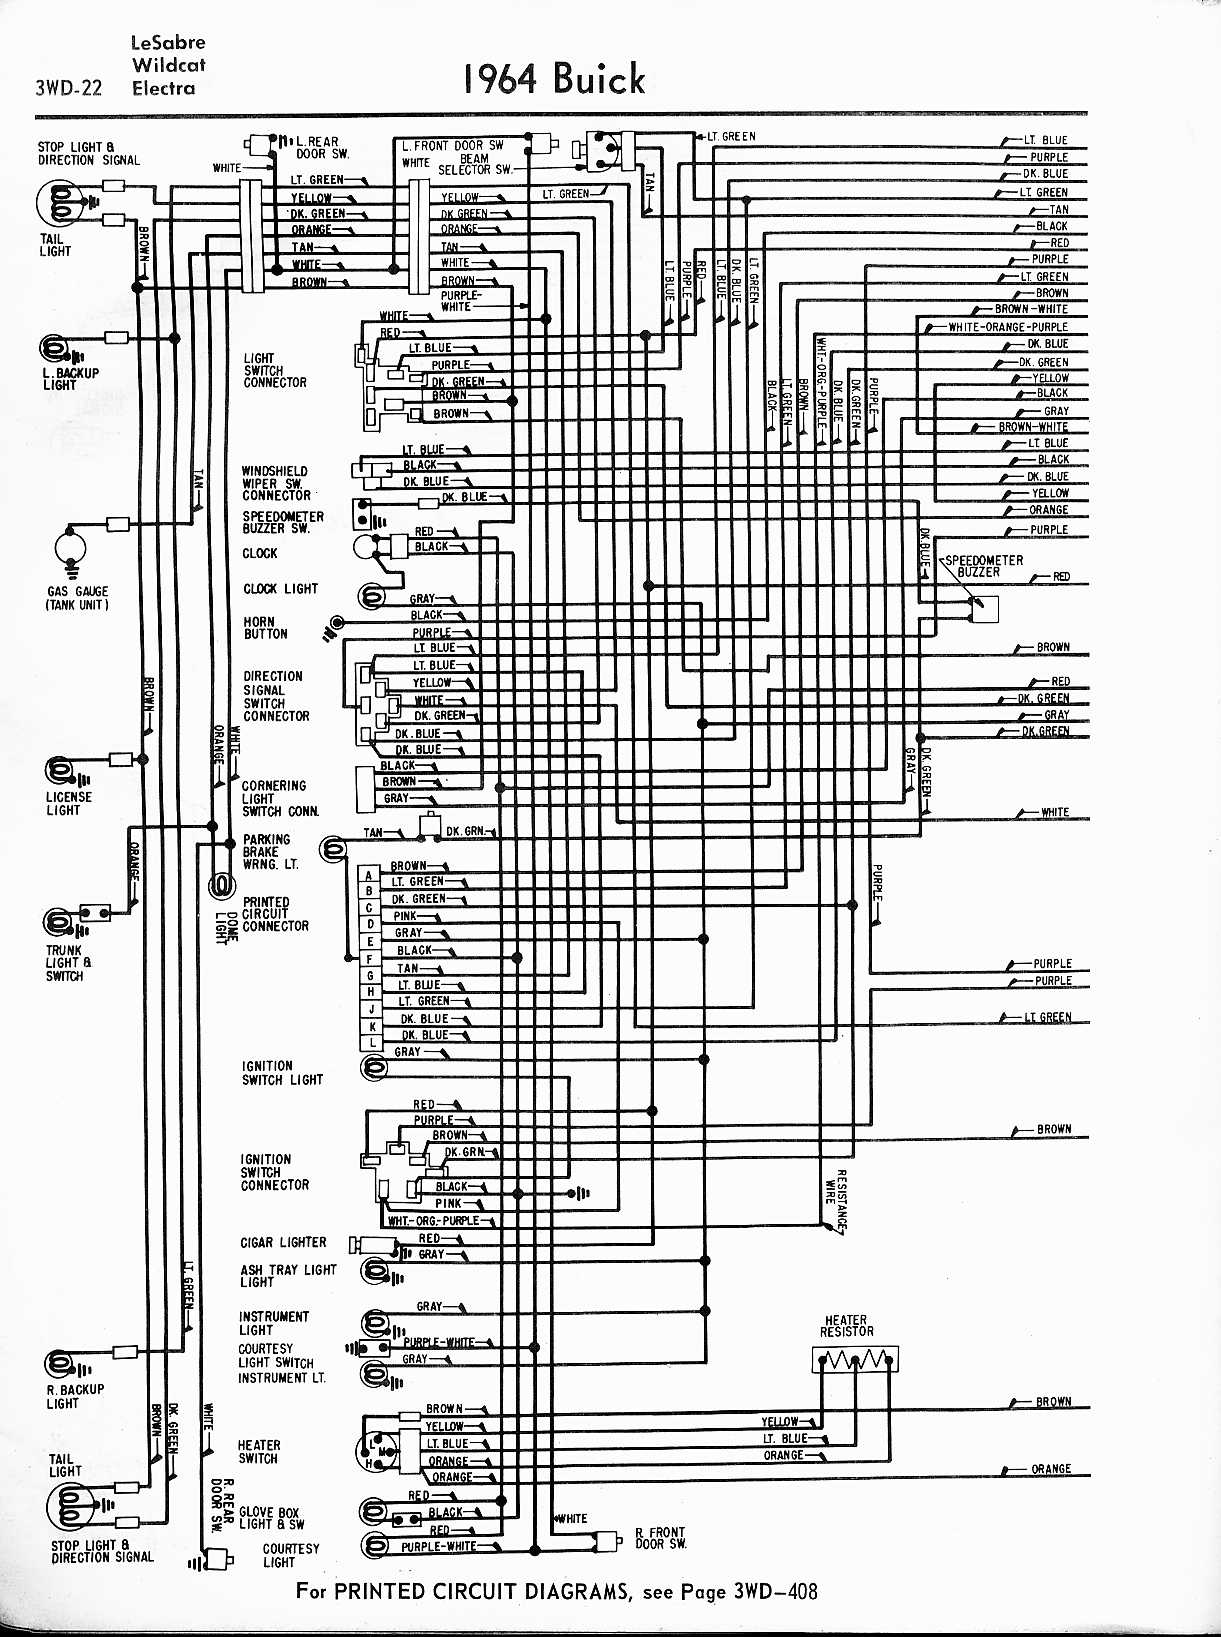 Buick Wiring Diagrams: 1957-1965  2001 Buick Century Wiring Diagram    The Old Car Manual Project